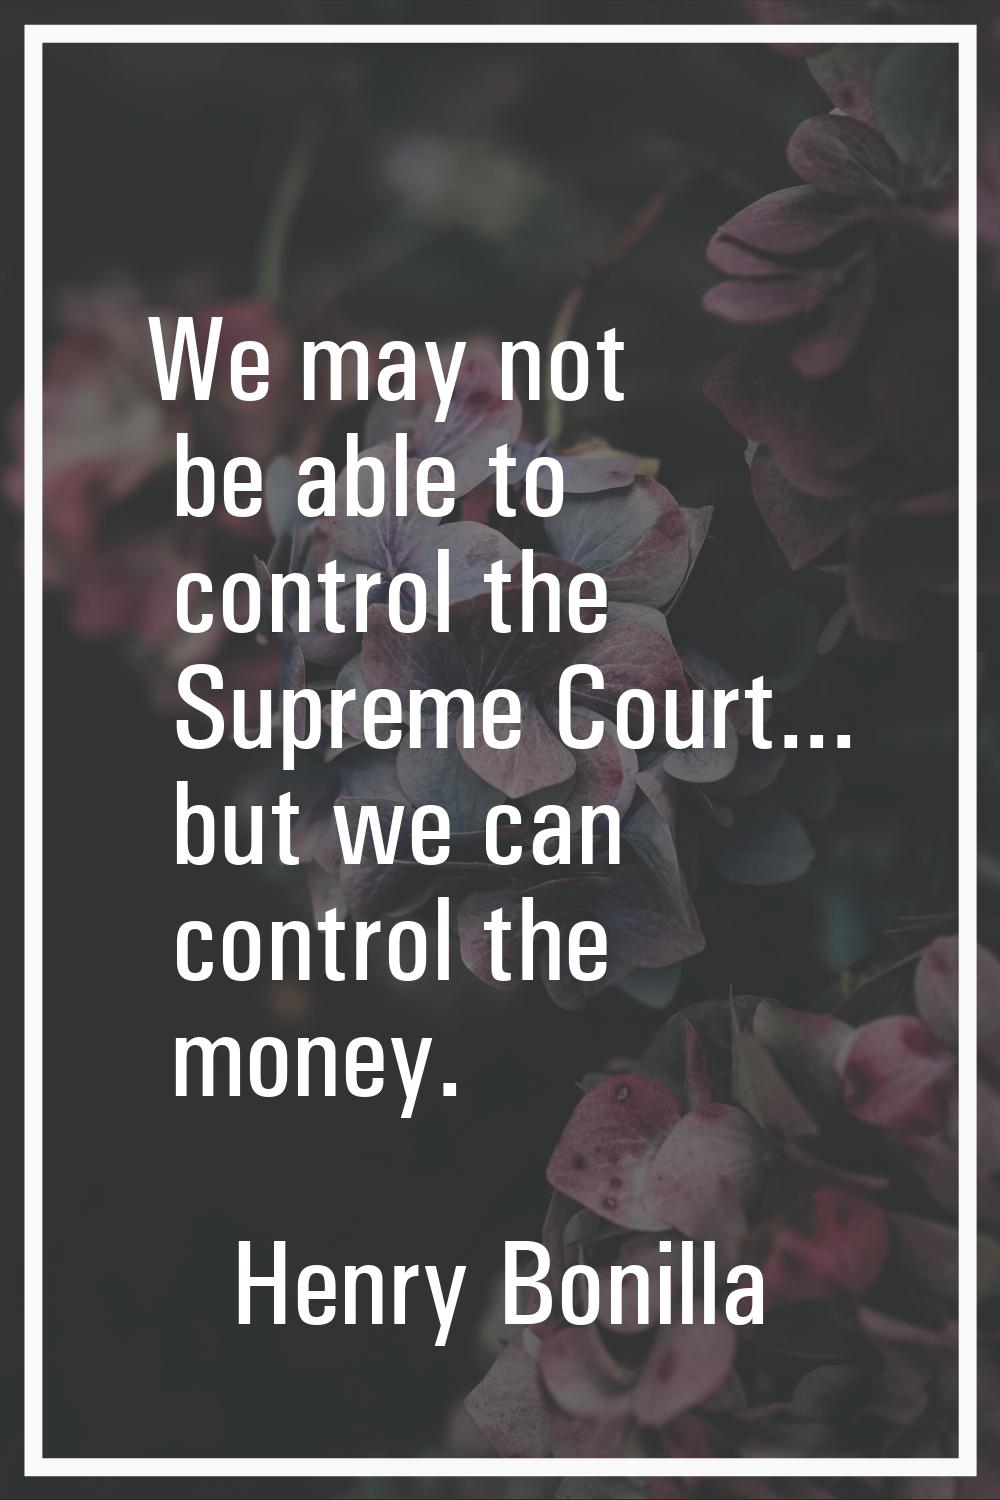 We may not be able to control the Supreme Court... but we can control the money.